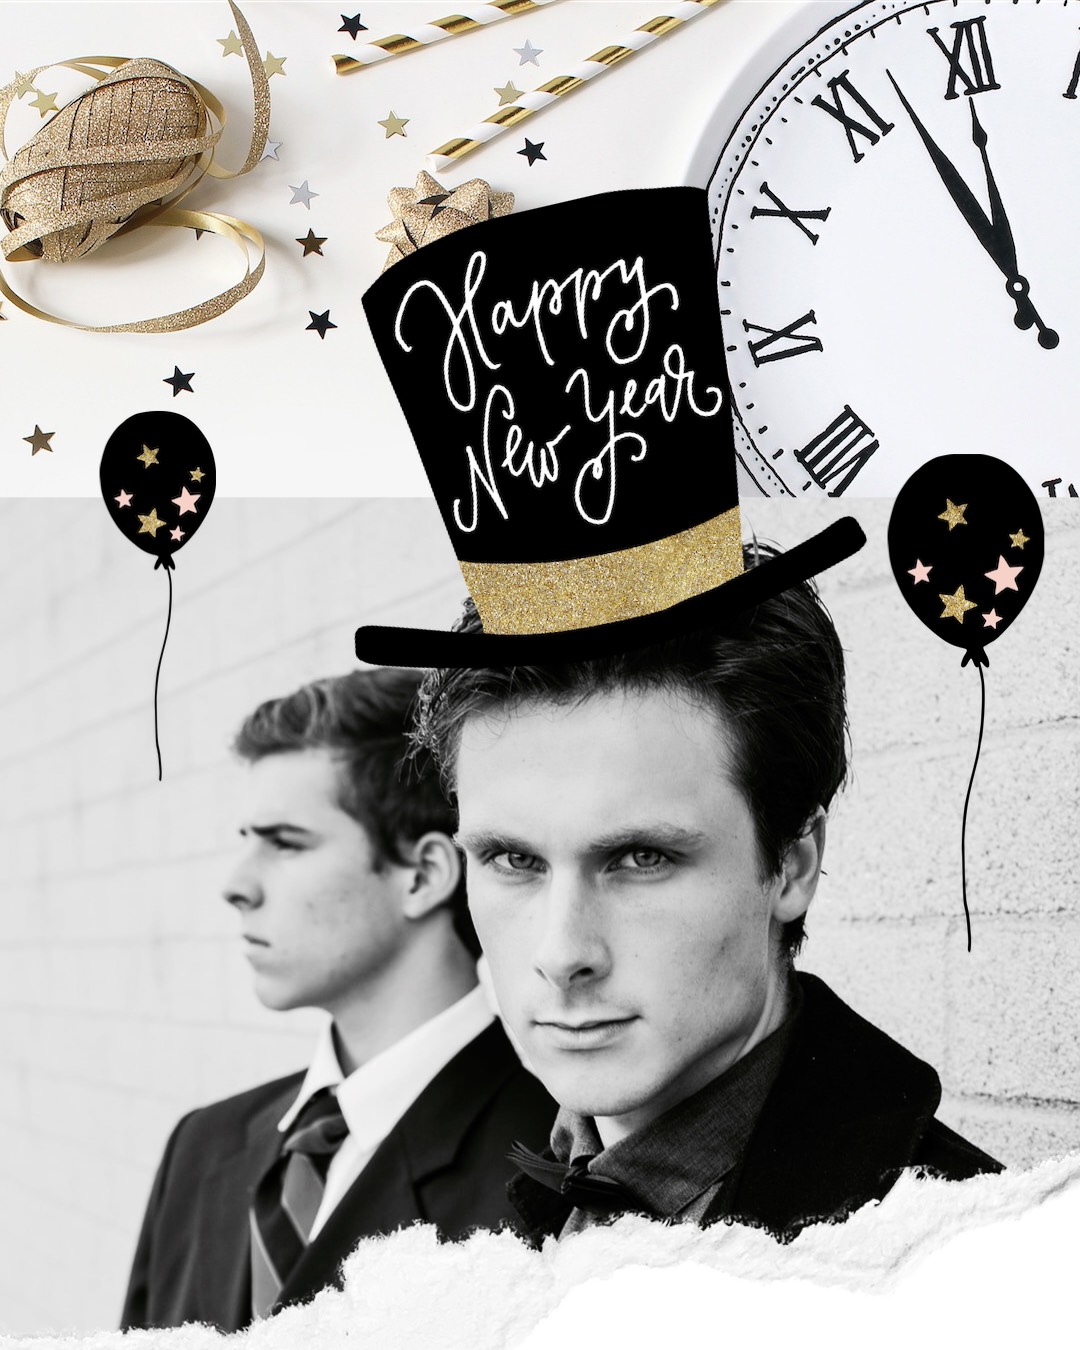 A Collage Of A Man Wearing A Top Hat Happy New Year Template